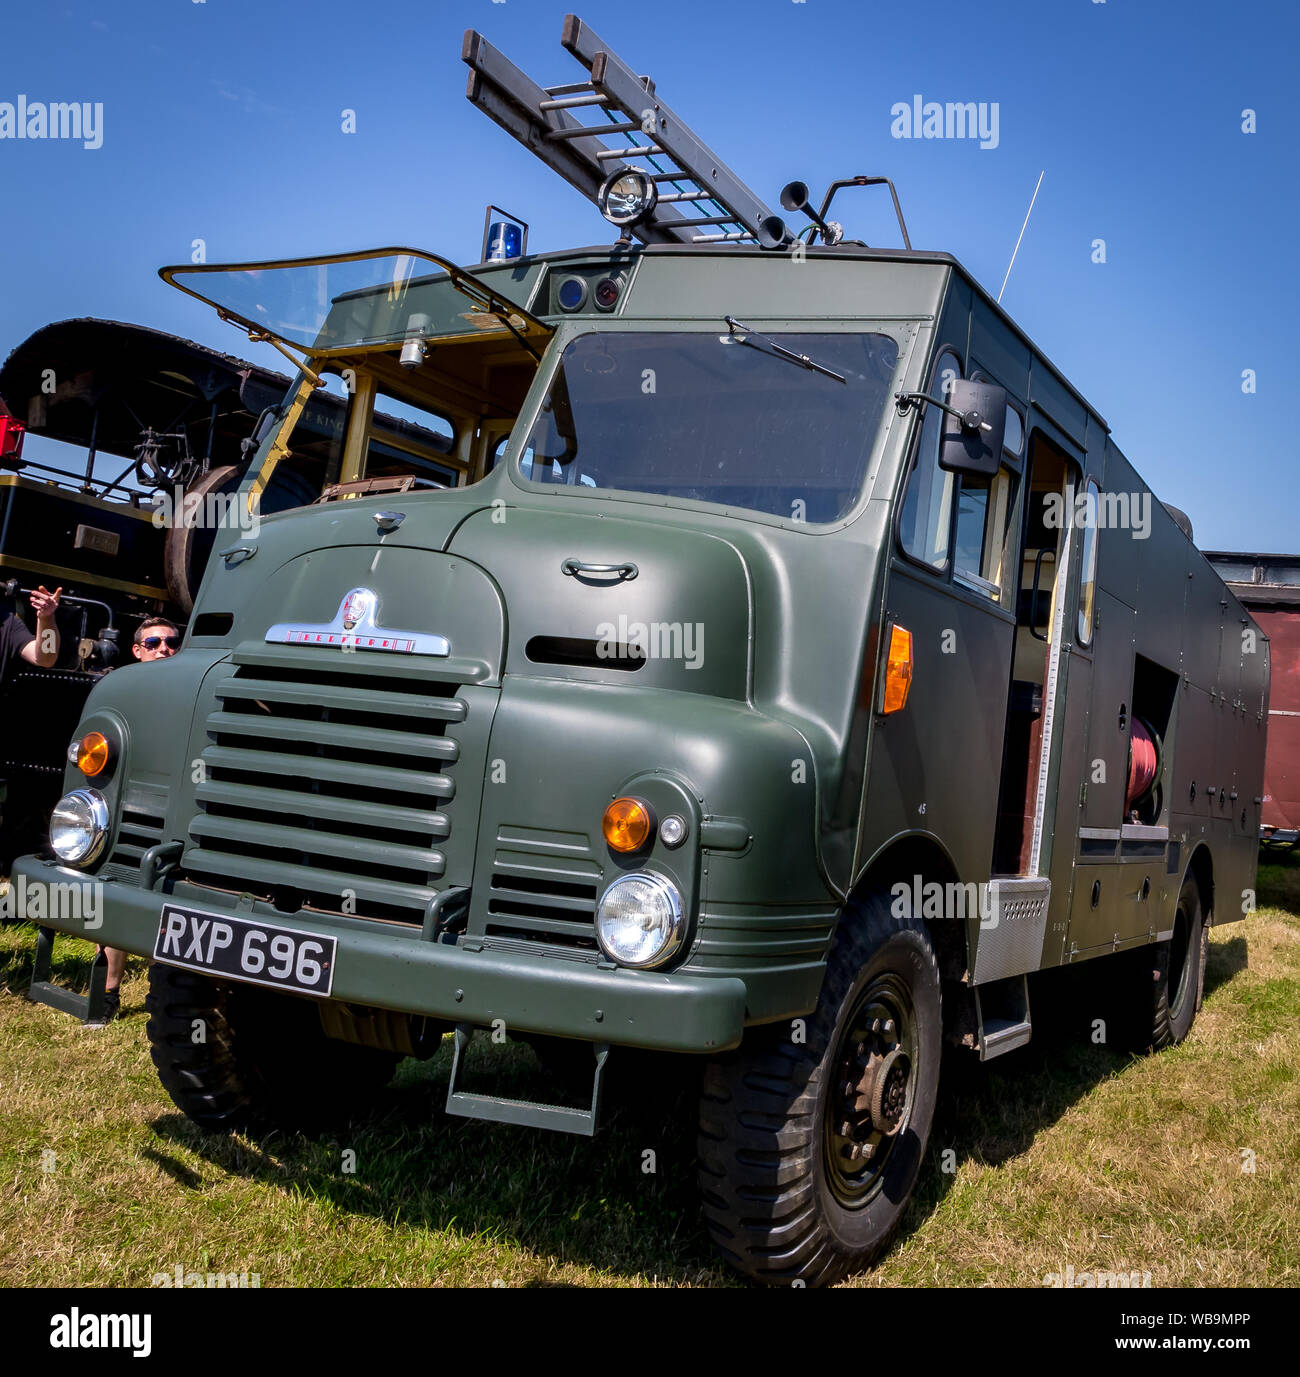 Hellingly, East Sussex UK. 25 Aug 2019. Festival of Transport. Vintage cars, steam engines, a mix of vehicles and entertainments at this bank holiday. Stock Photo